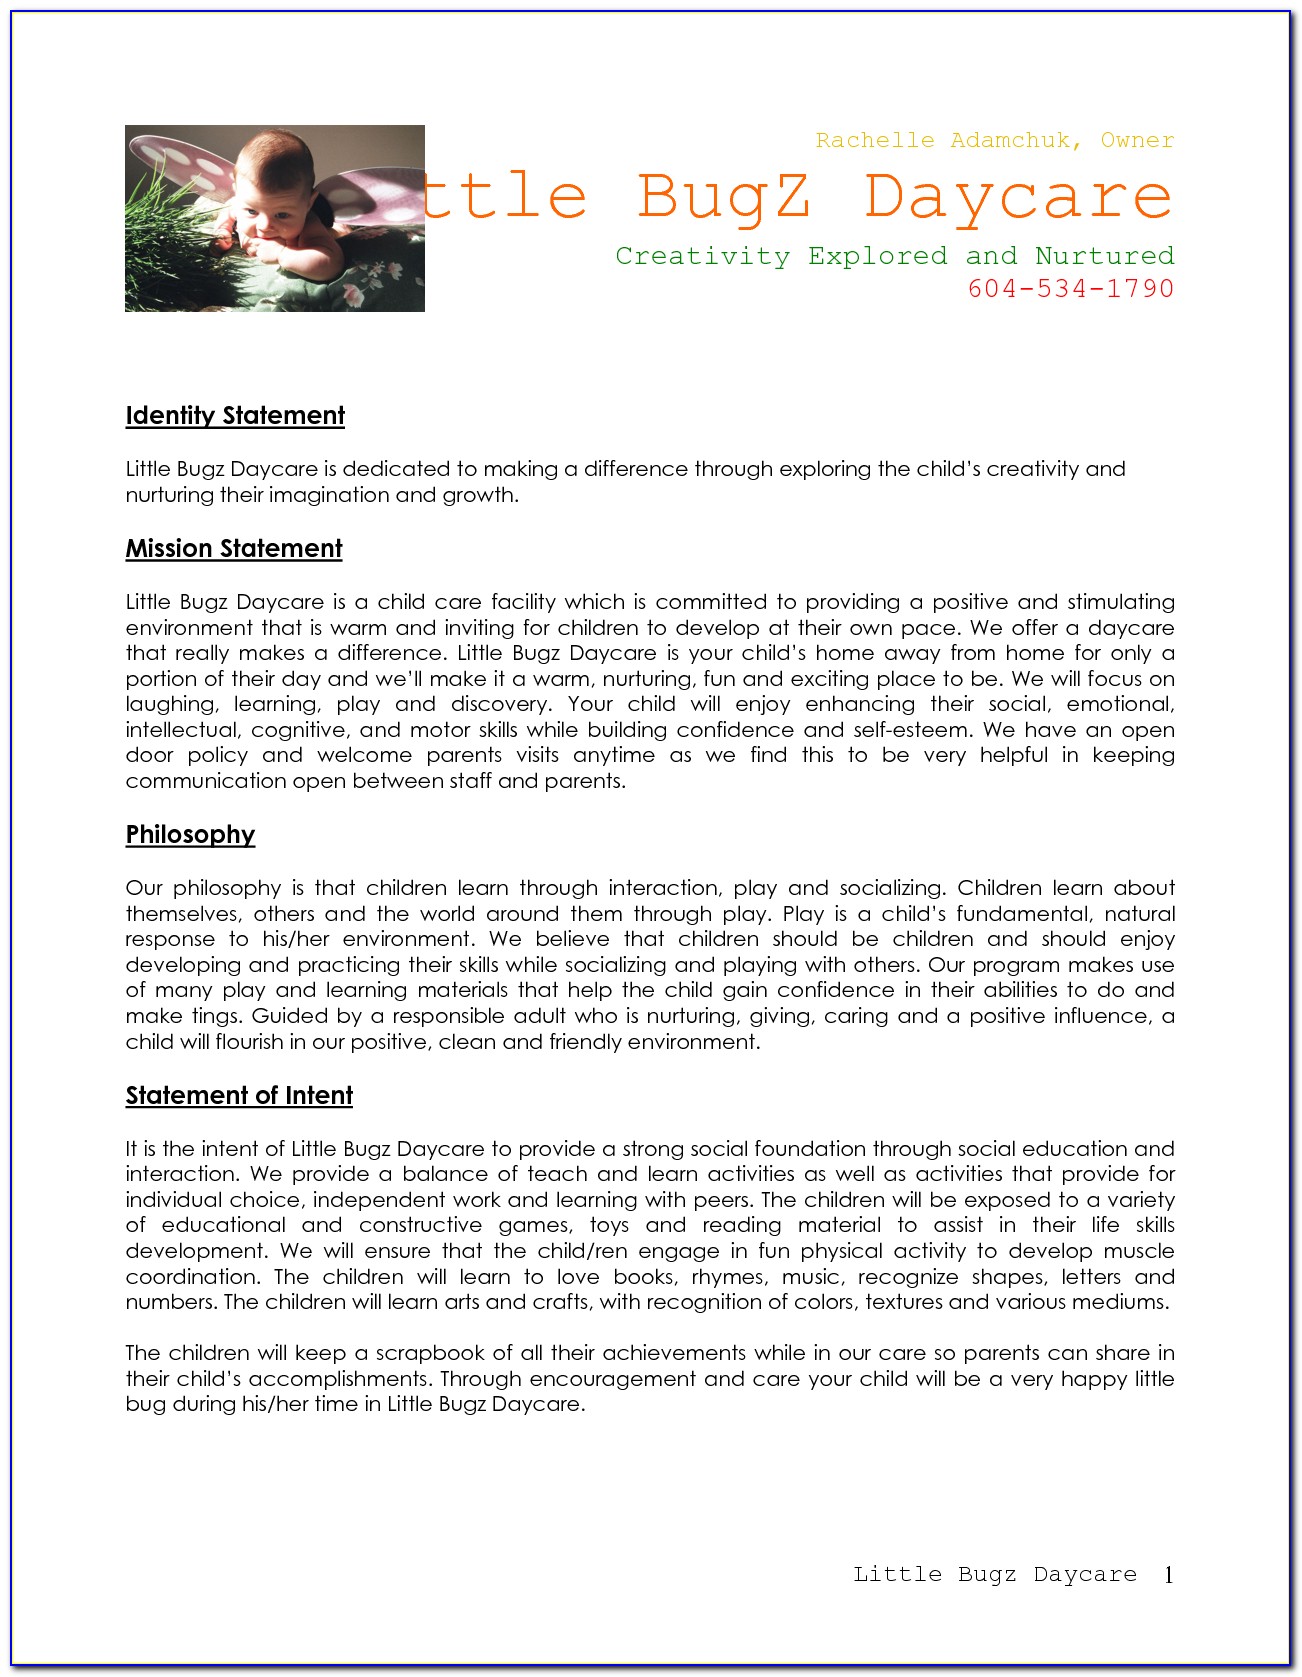 Child Care Business Plan Example